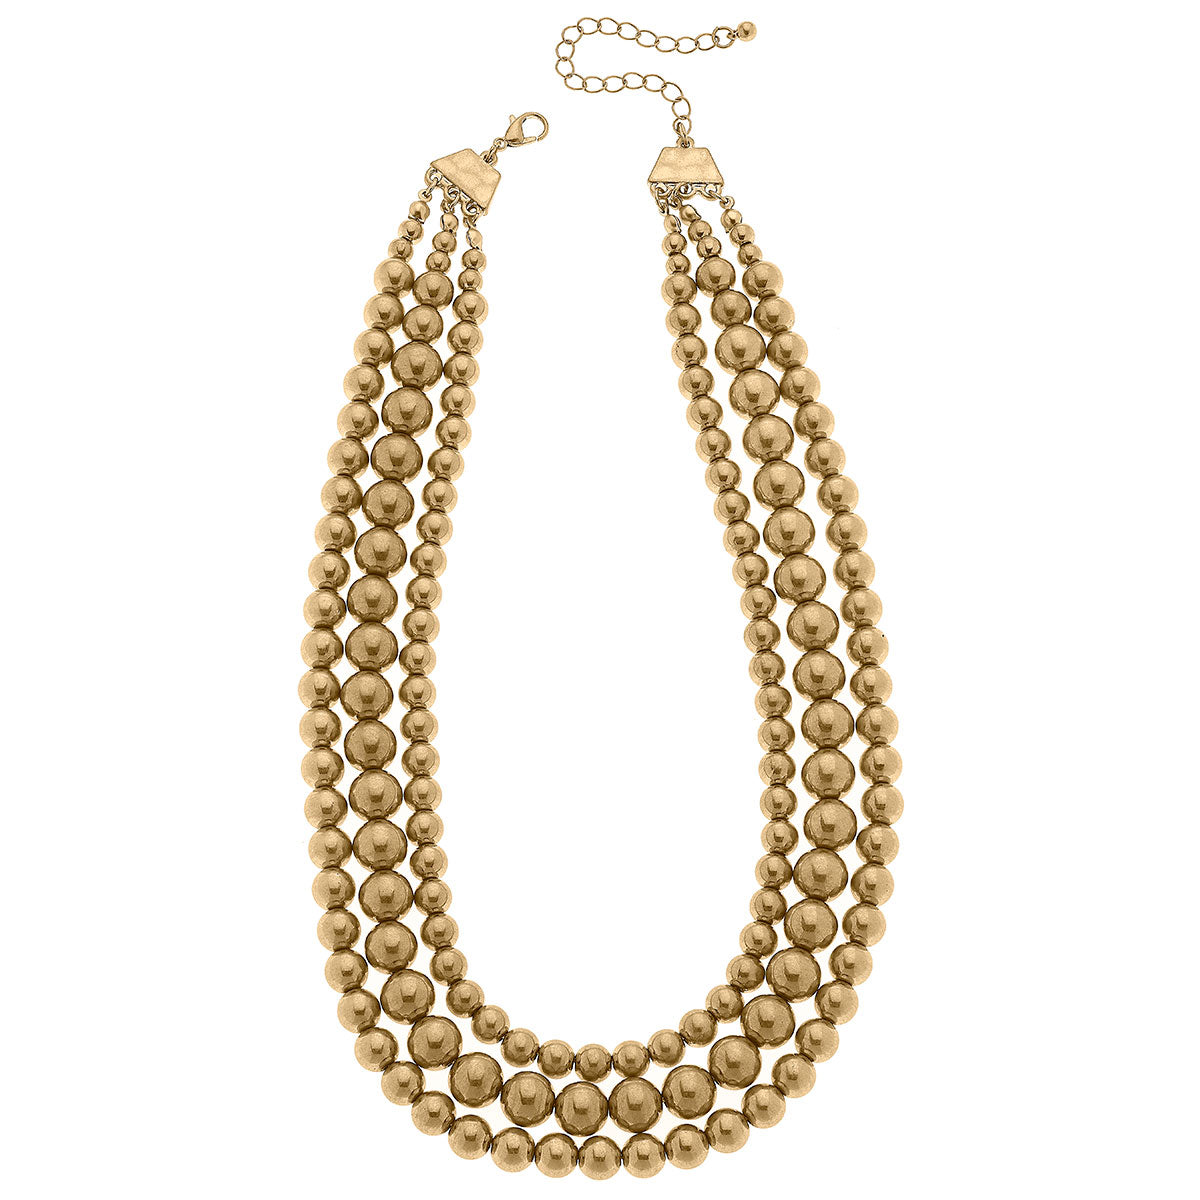 Desiree 3-Row Layered Ball Bead Necklace in Worn Gold